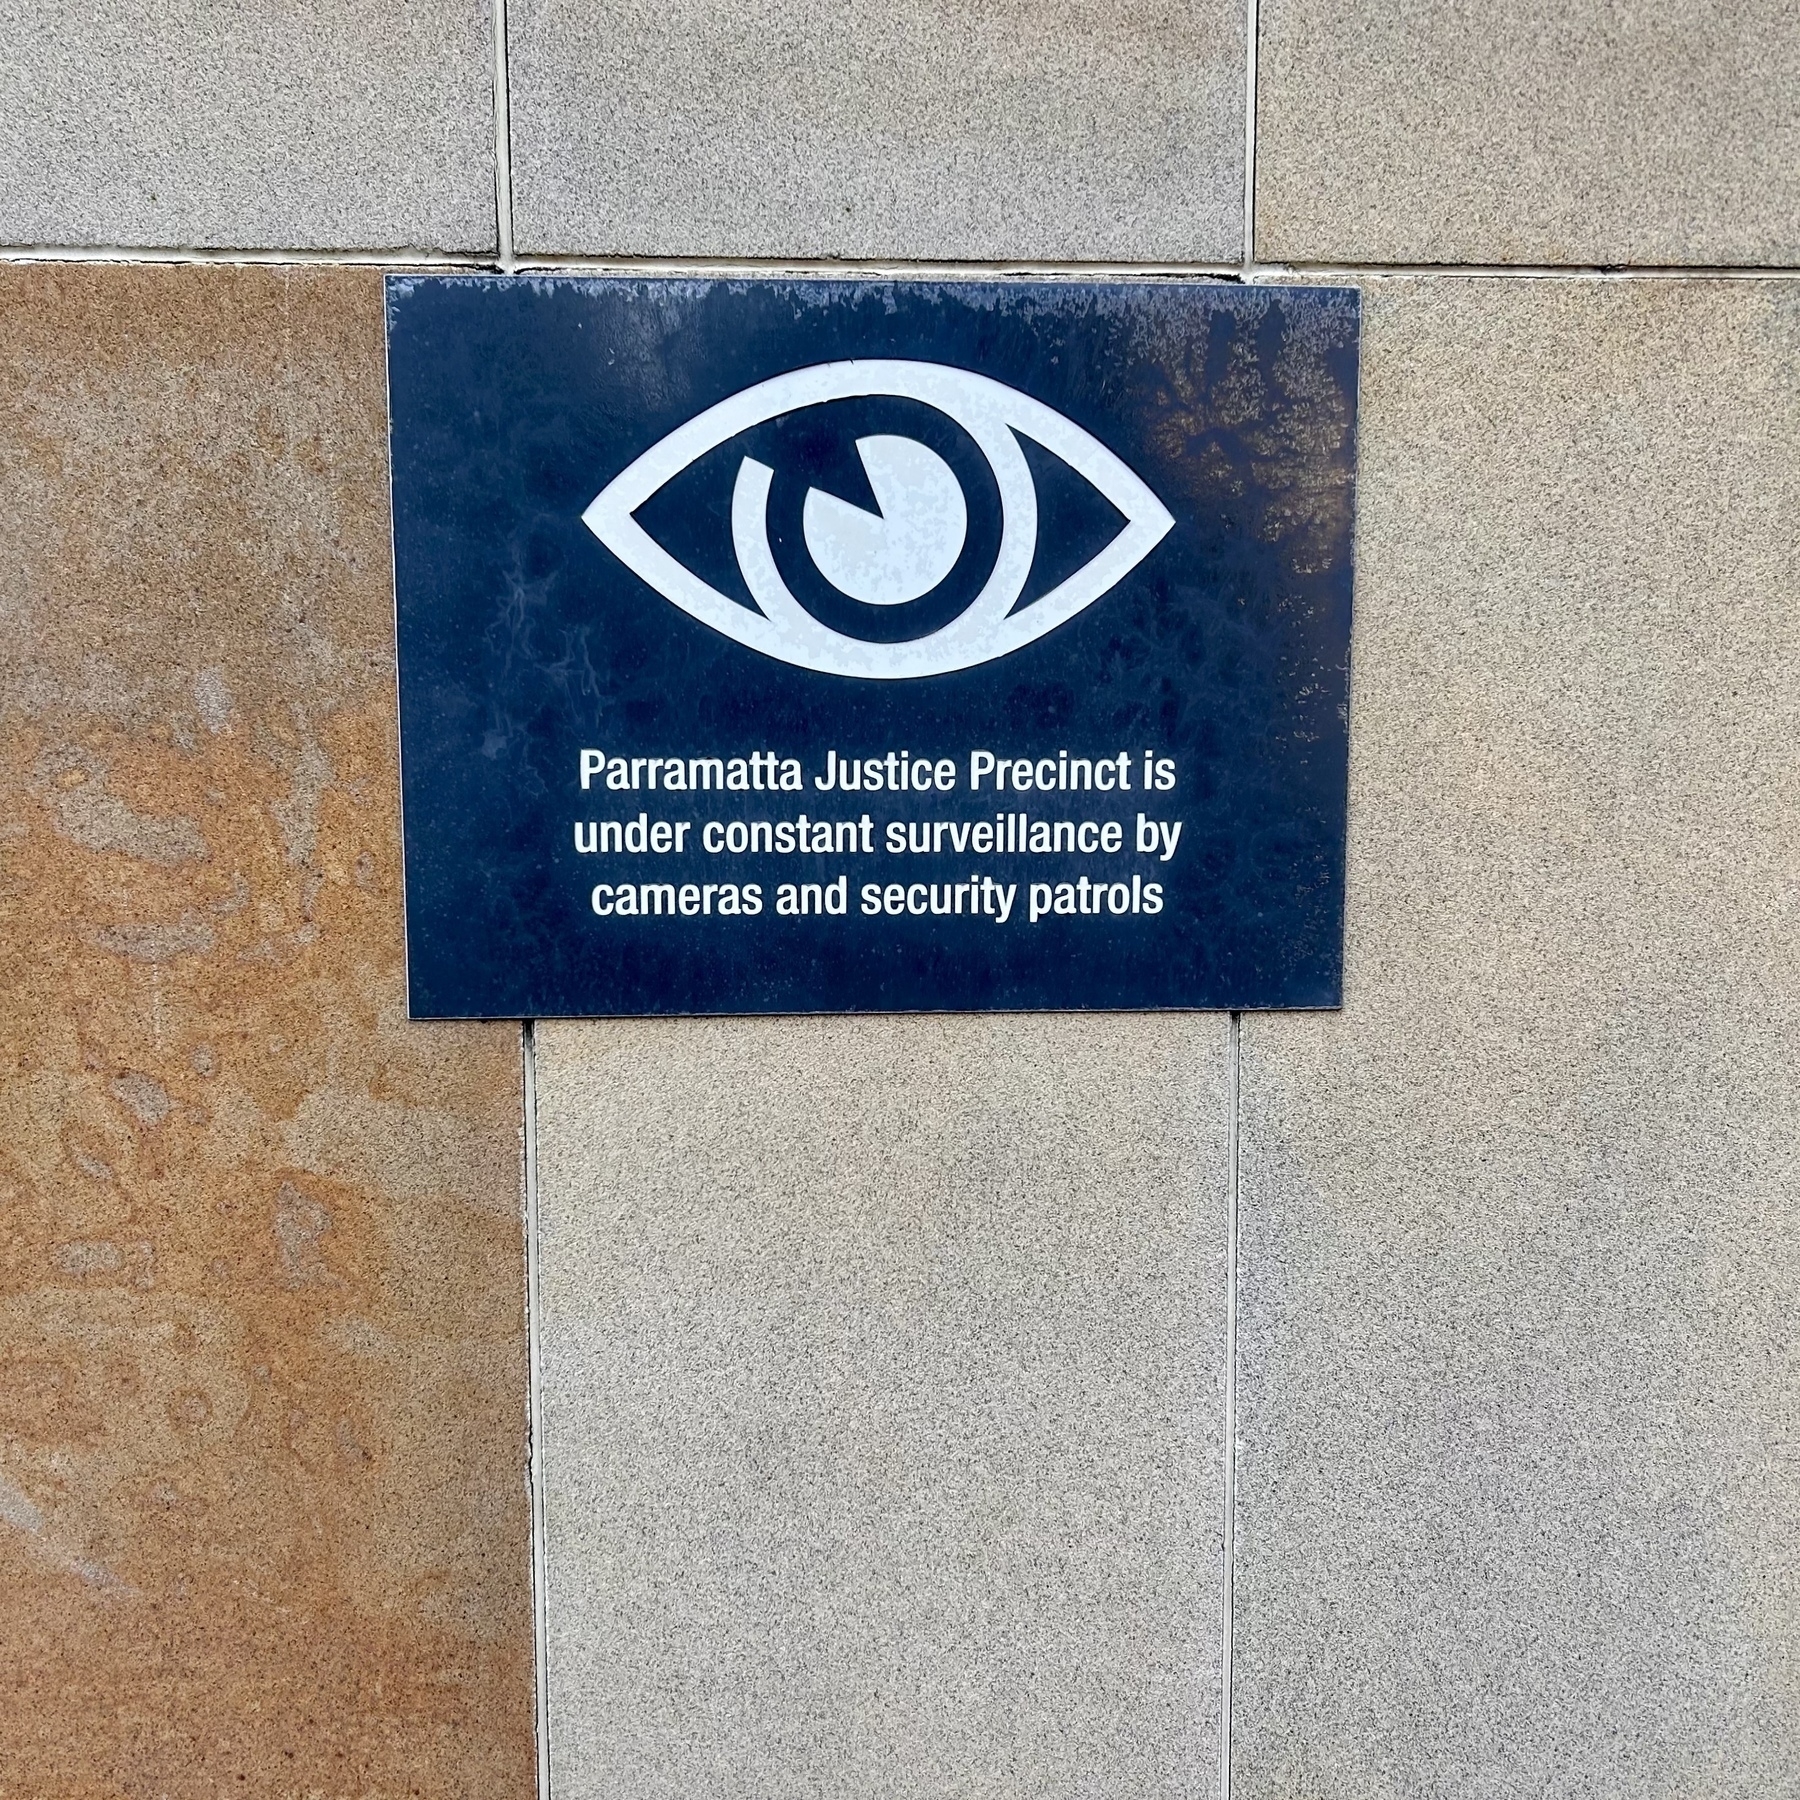 A sign mounted to a wall that says "Parramatta Justice Precinct is under constant surveillance by cameras and security patrols"